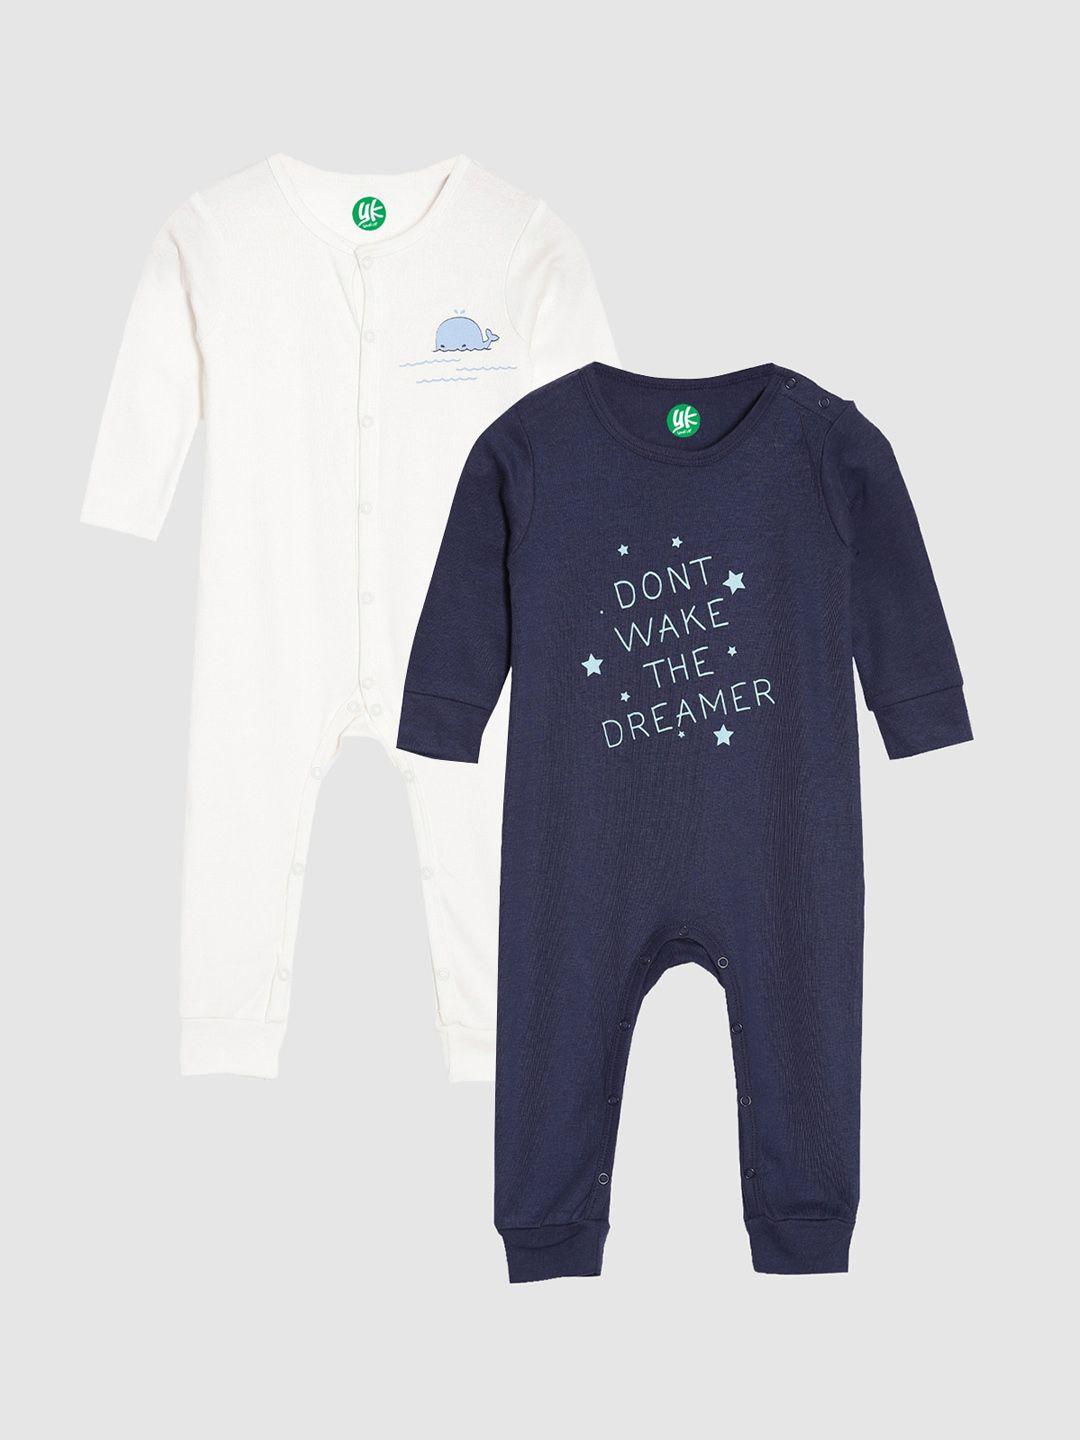 yk organic infant boys pack of 2 navy blue and off white organic cotton rompers